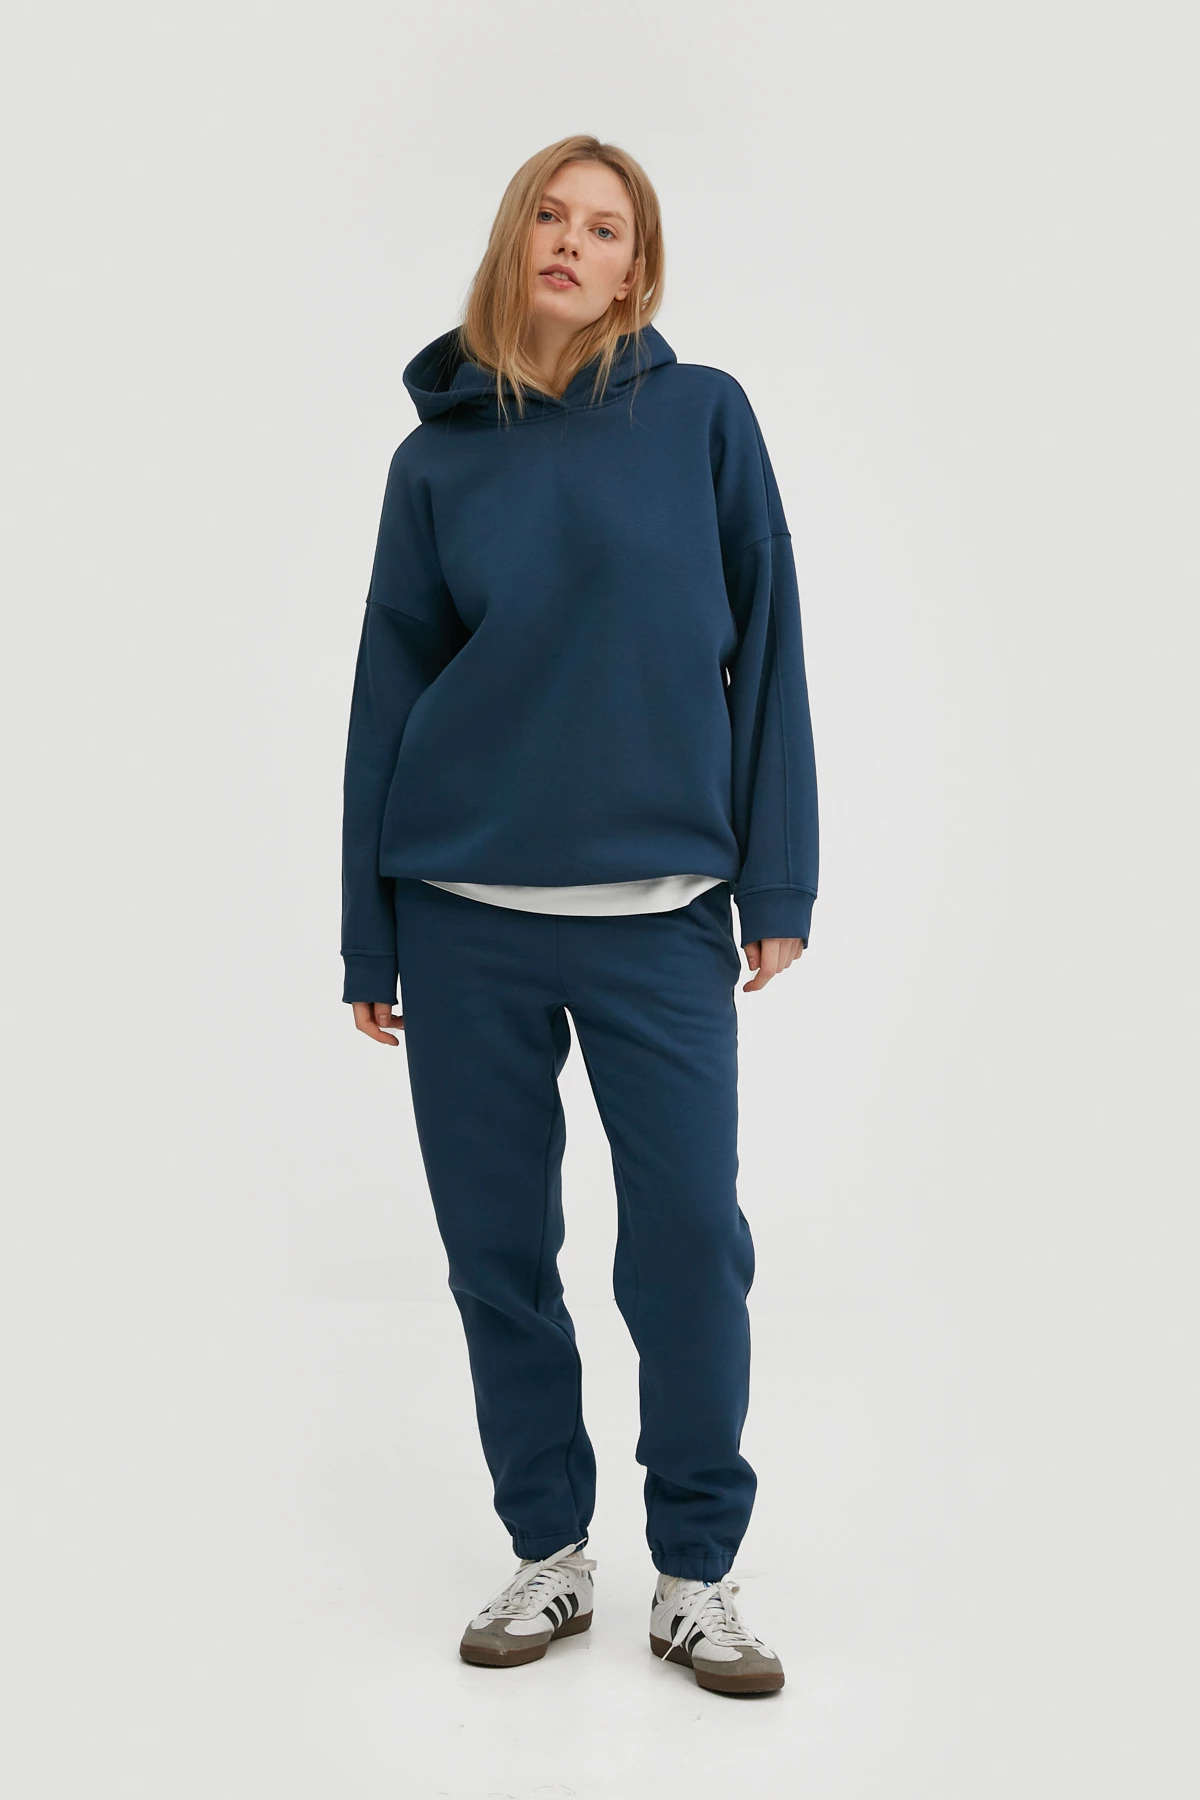 Navy blue elongated jersey joggers with fleece, photo 1